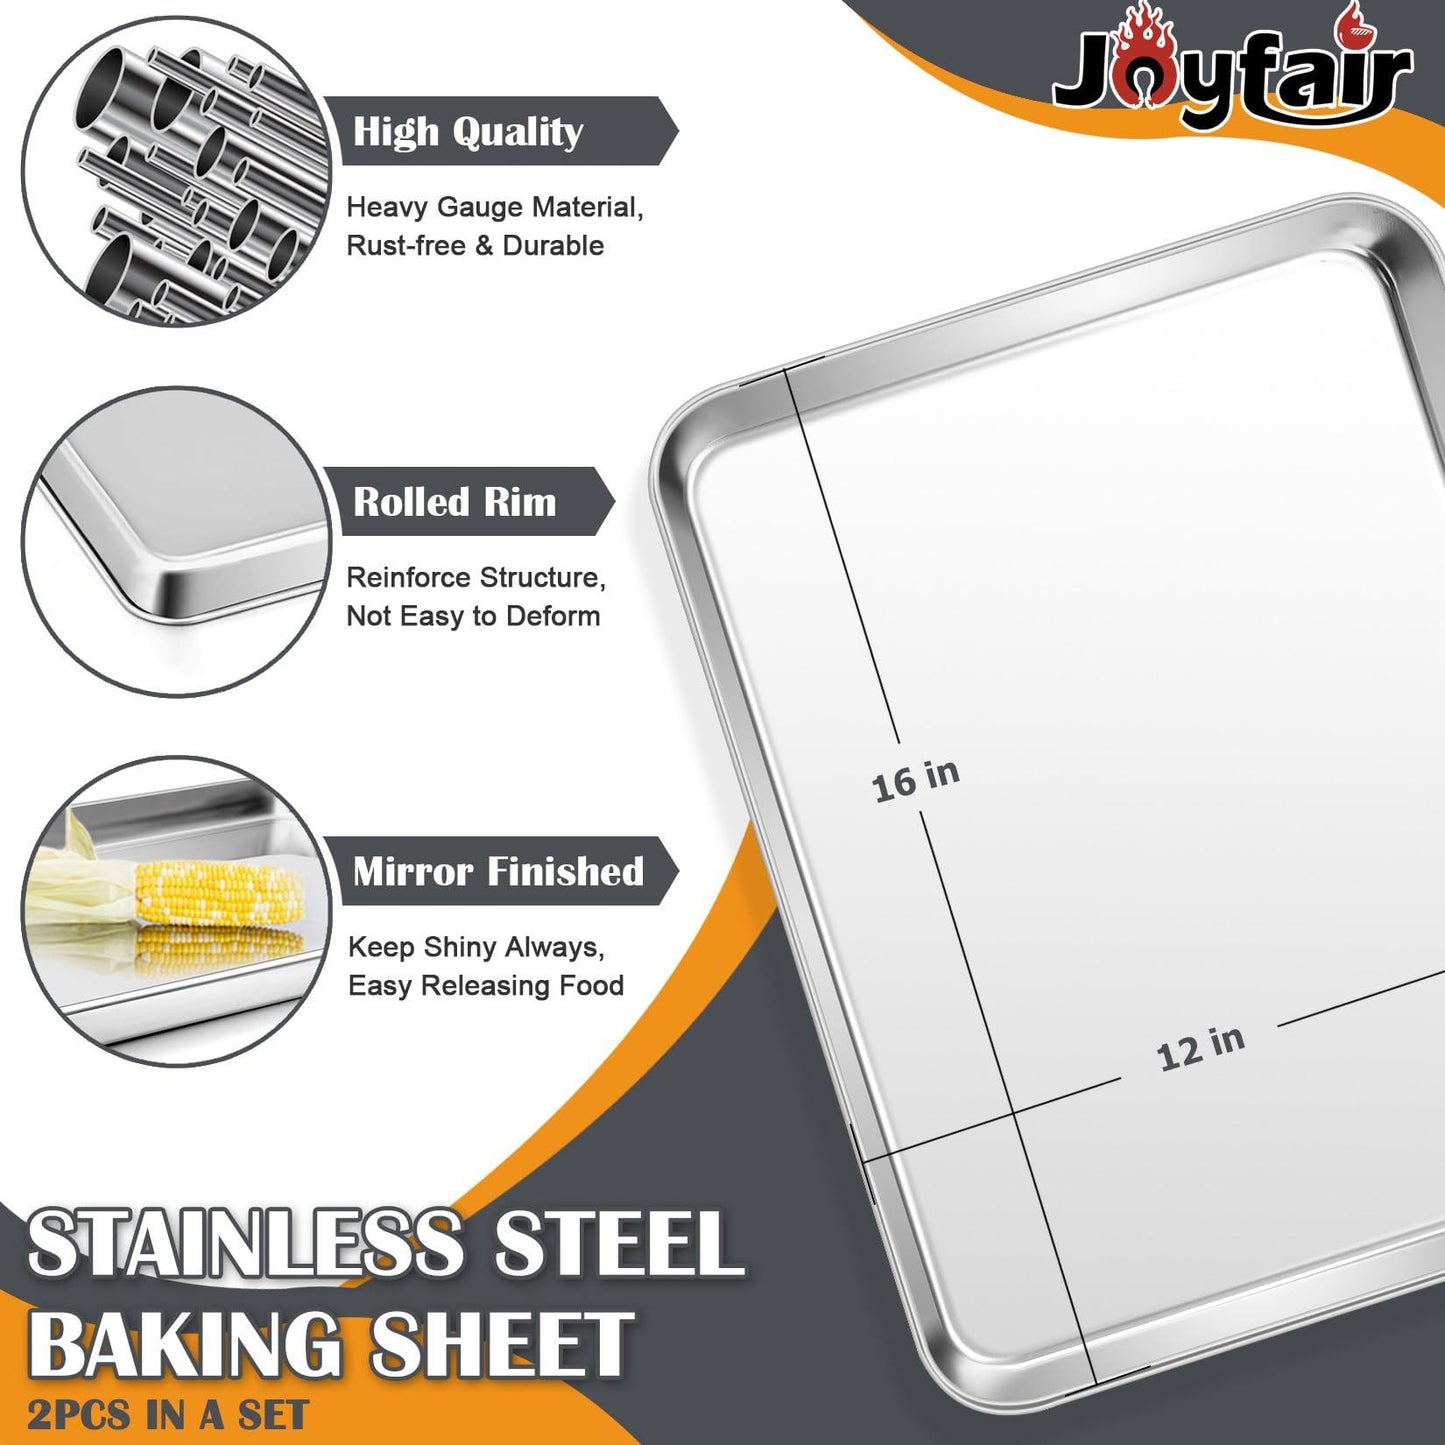 2Pcs Baking Sheet Pan Set (16inch), Joyfair Stainless Steel Large Cookie Sheets, Commercial Metal Pans Tray Oven Bakeware for Jelly Roll/Bread/Bacon, Non Toxic & Healthy, Rust-free & Dishwasher Safe - CookCave